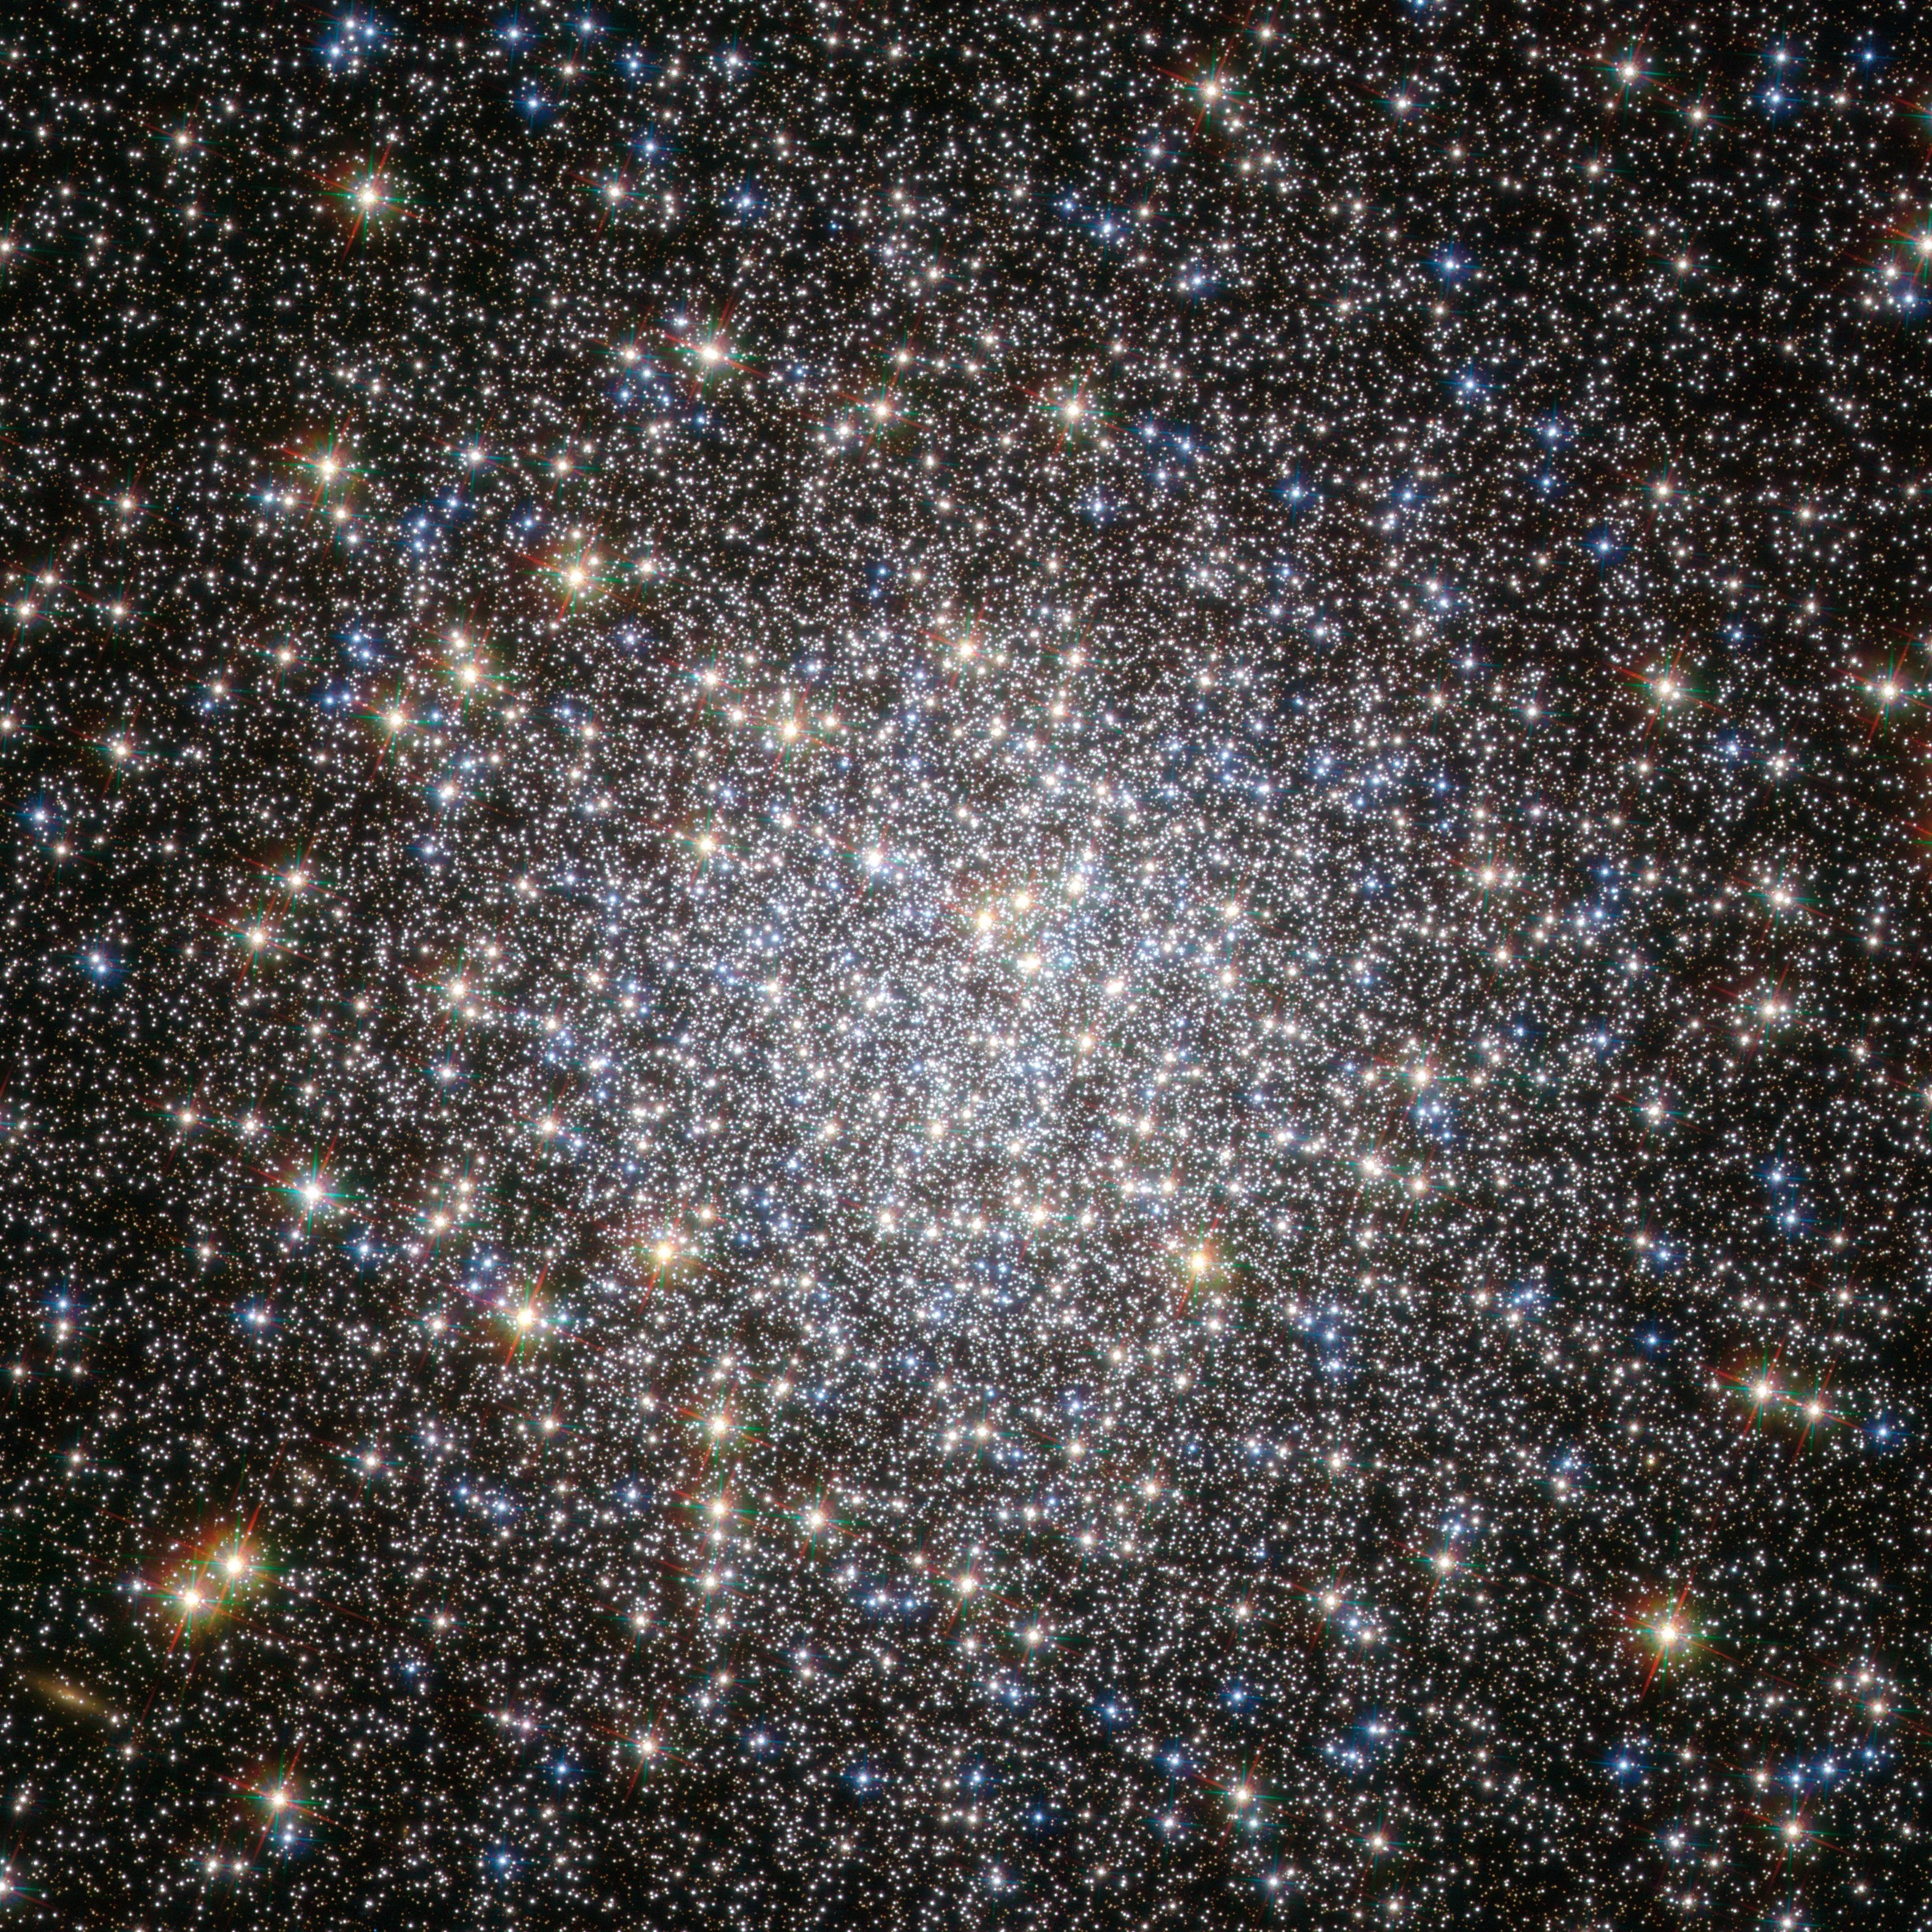 Hubble view of M5